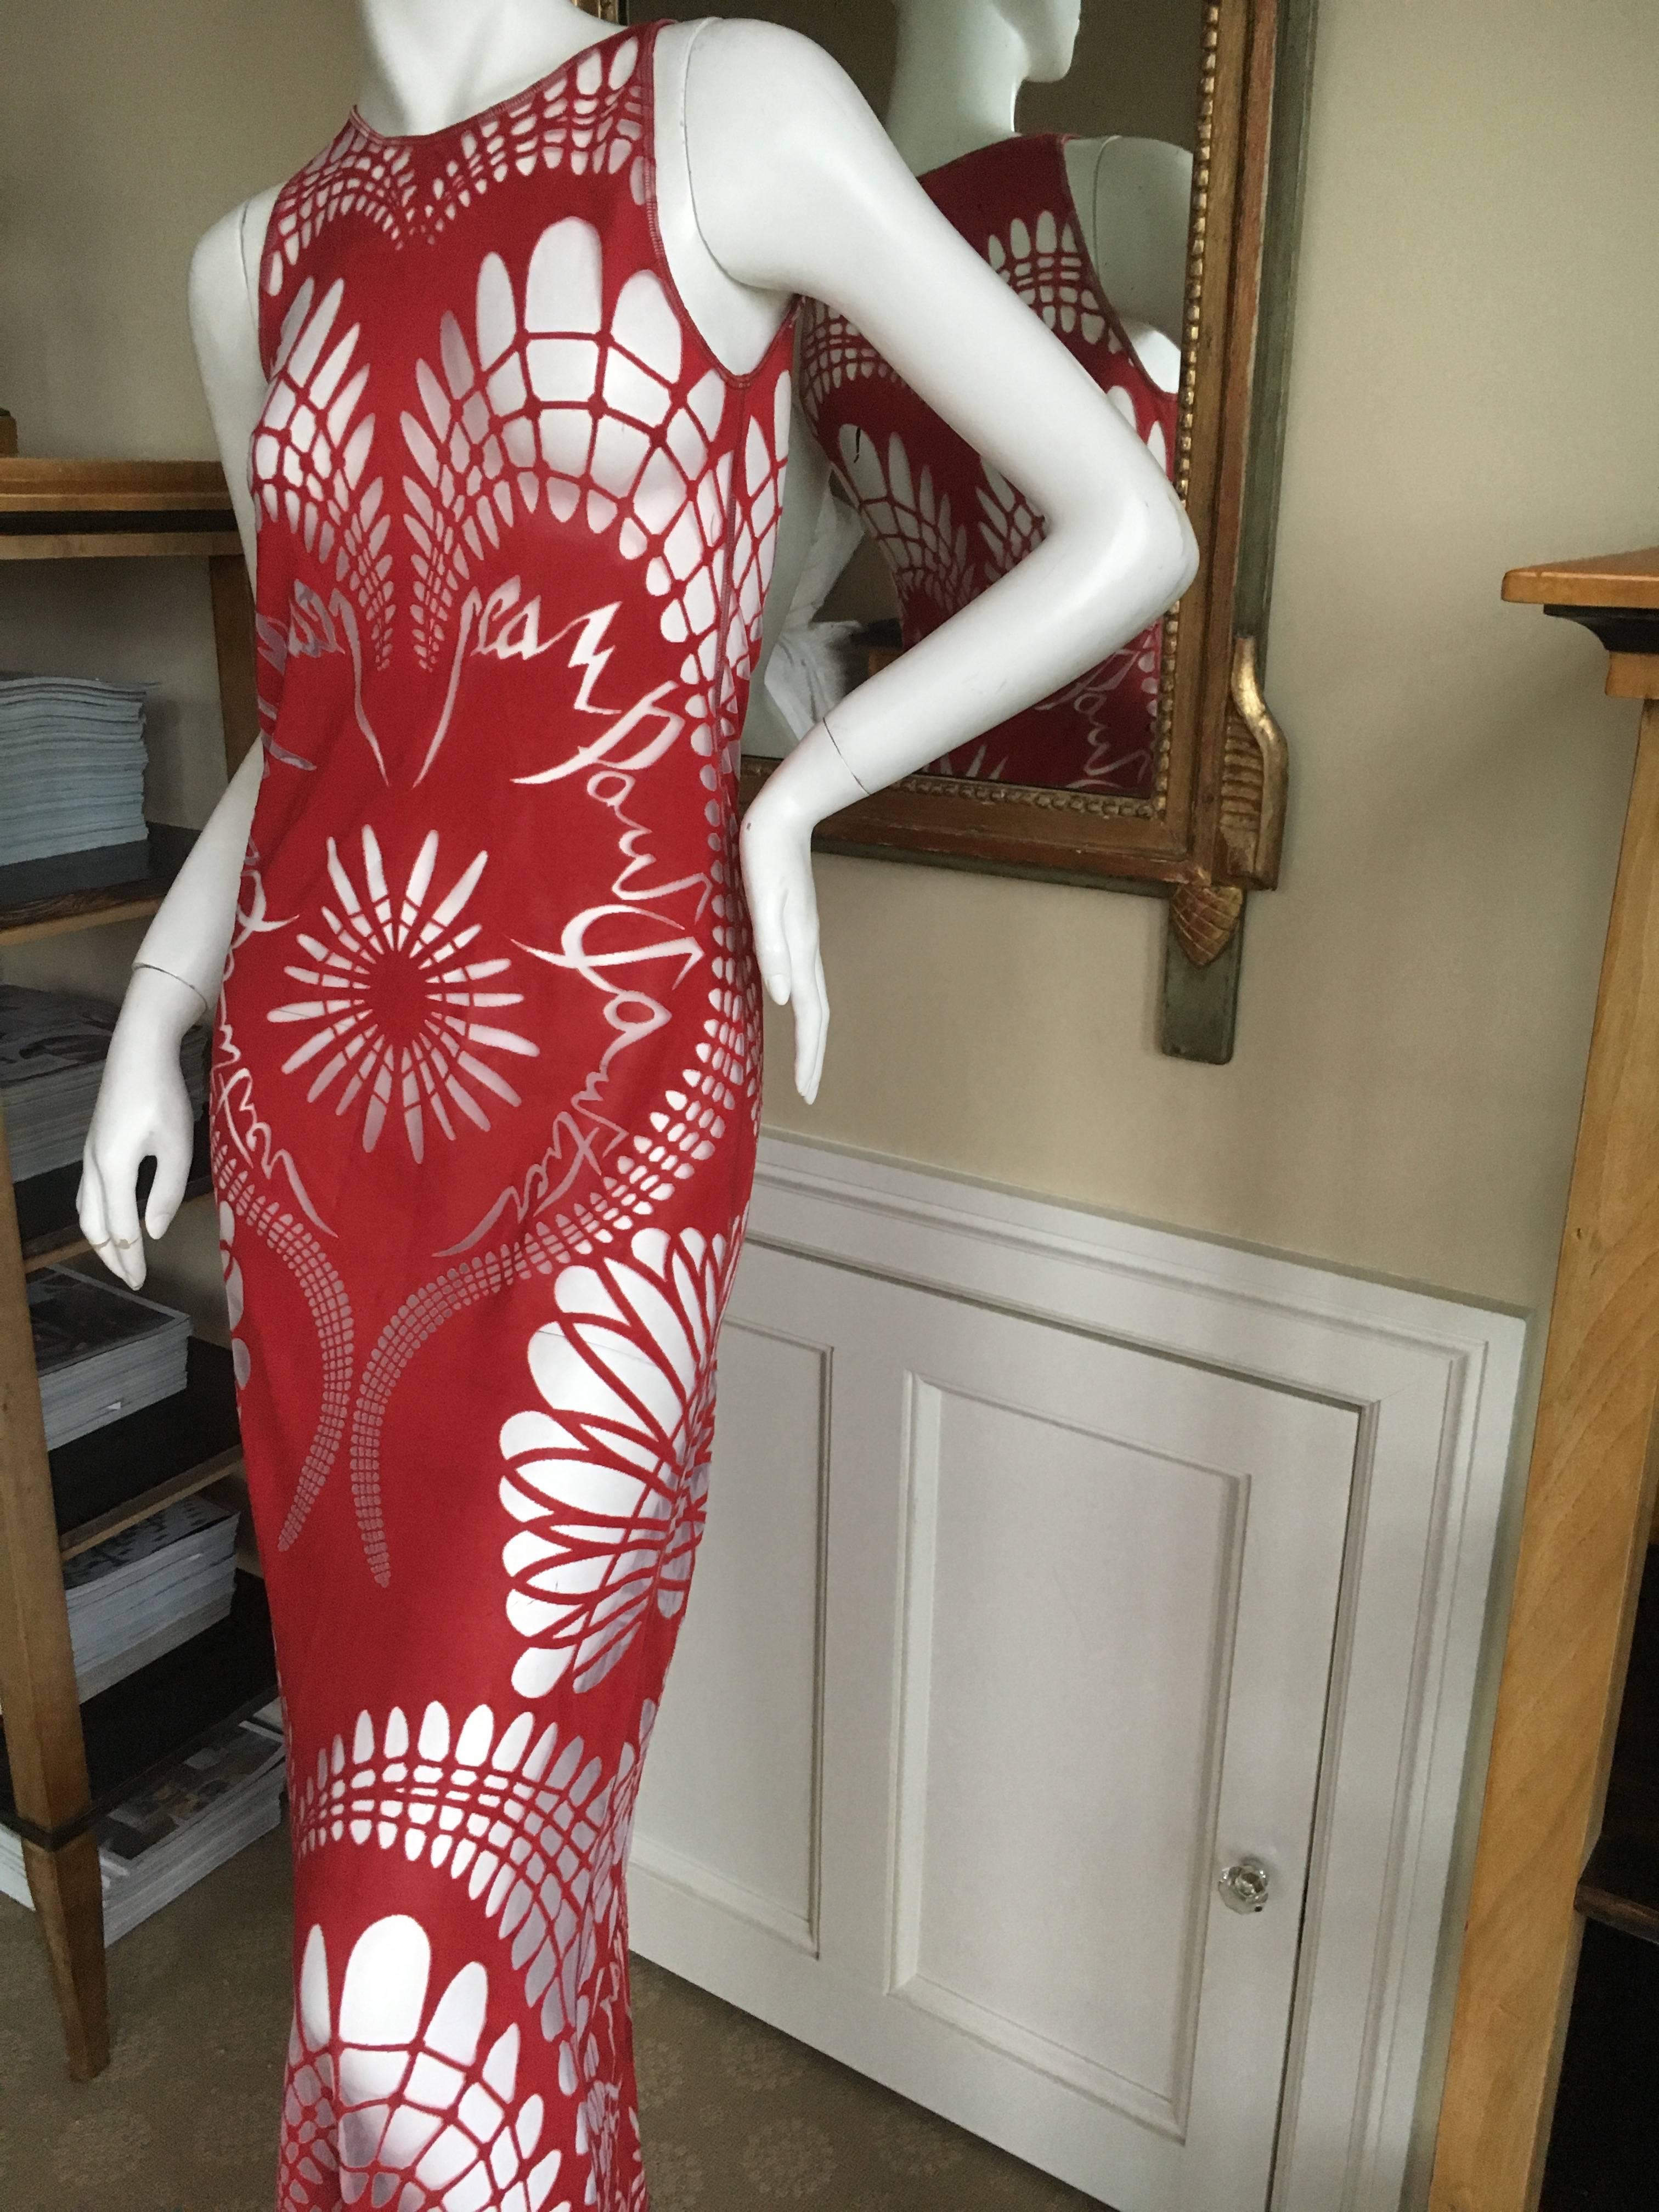  Jean Paul Gaultier Femme Rare Vintage Sheer Tattoo Dress In Excellent Condition For Sale In Cloverdale, CA